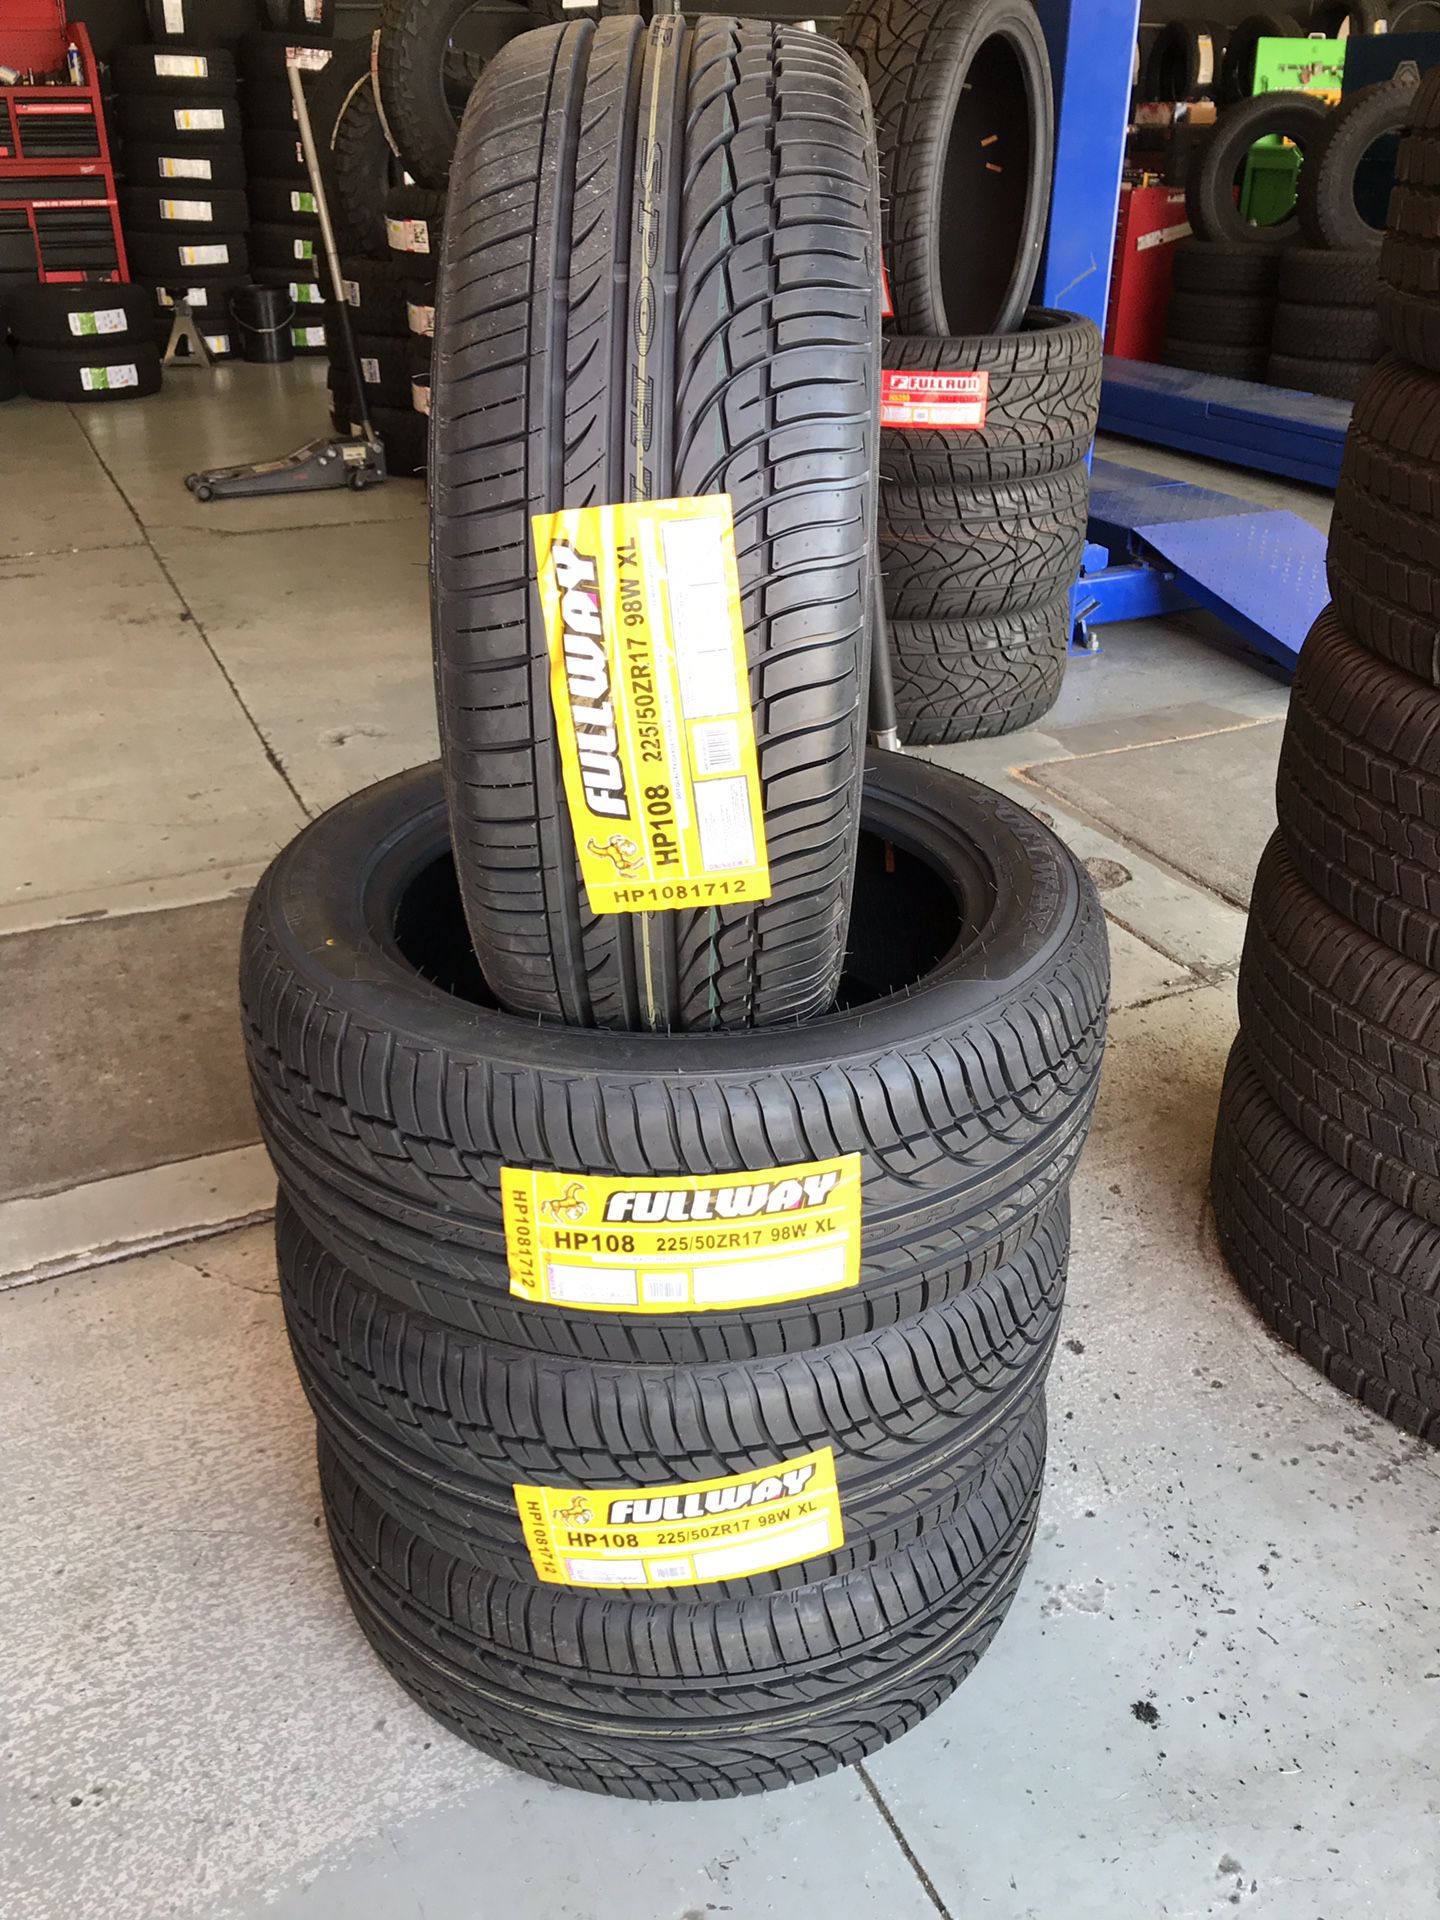 BRAND NEW SET OF TIRES 225/50/17